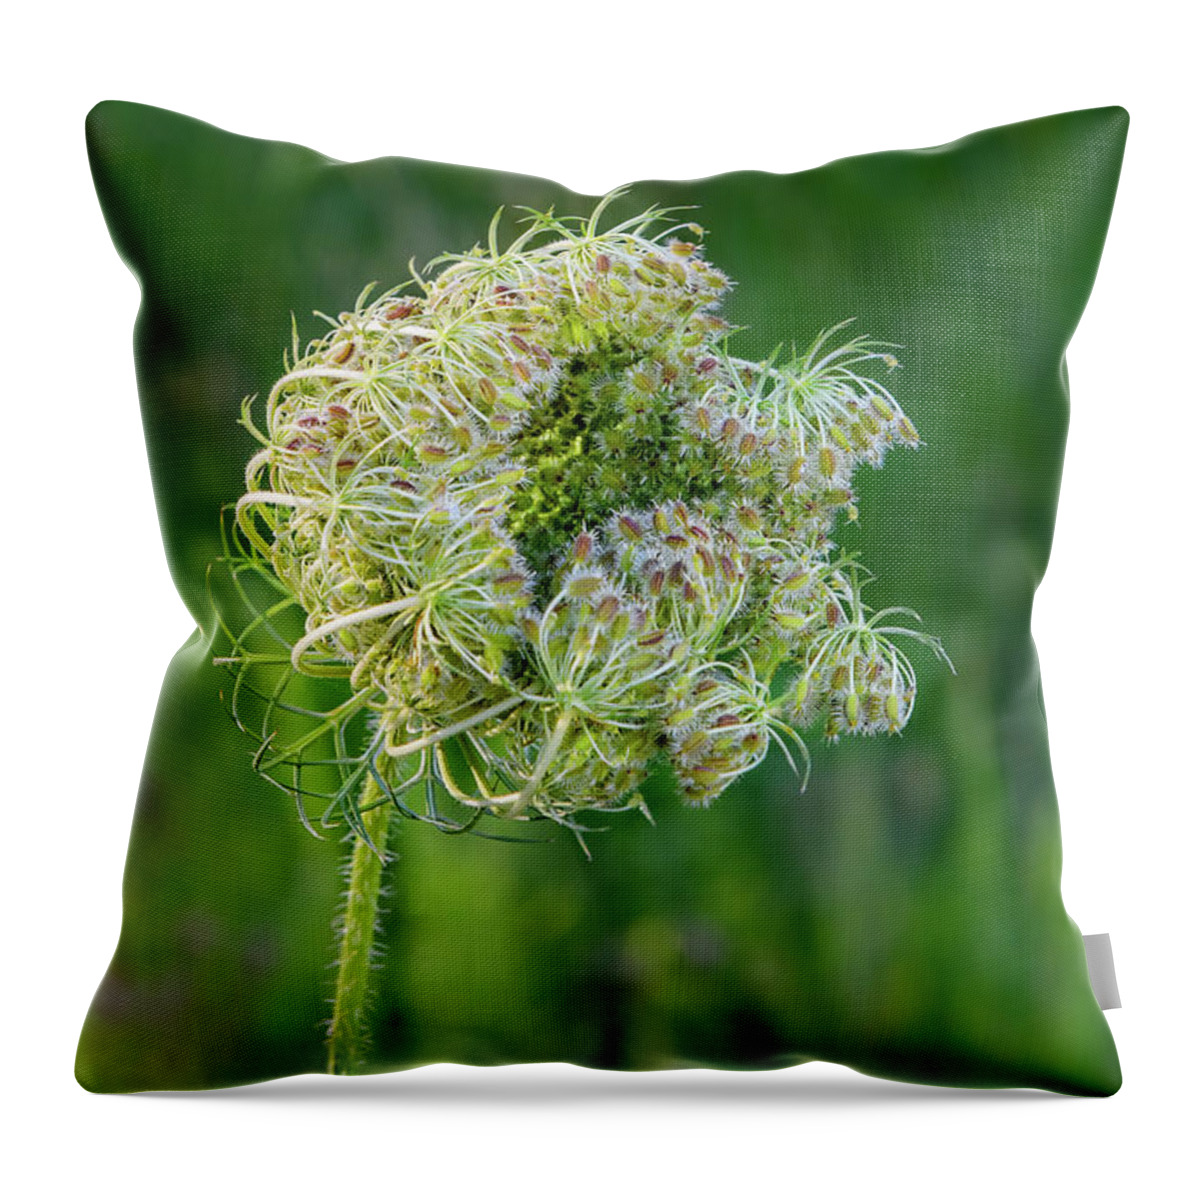 Flowers Throw Pillow featuring the photograph Queen Annes Lace Flower Cluster by Fon Denton